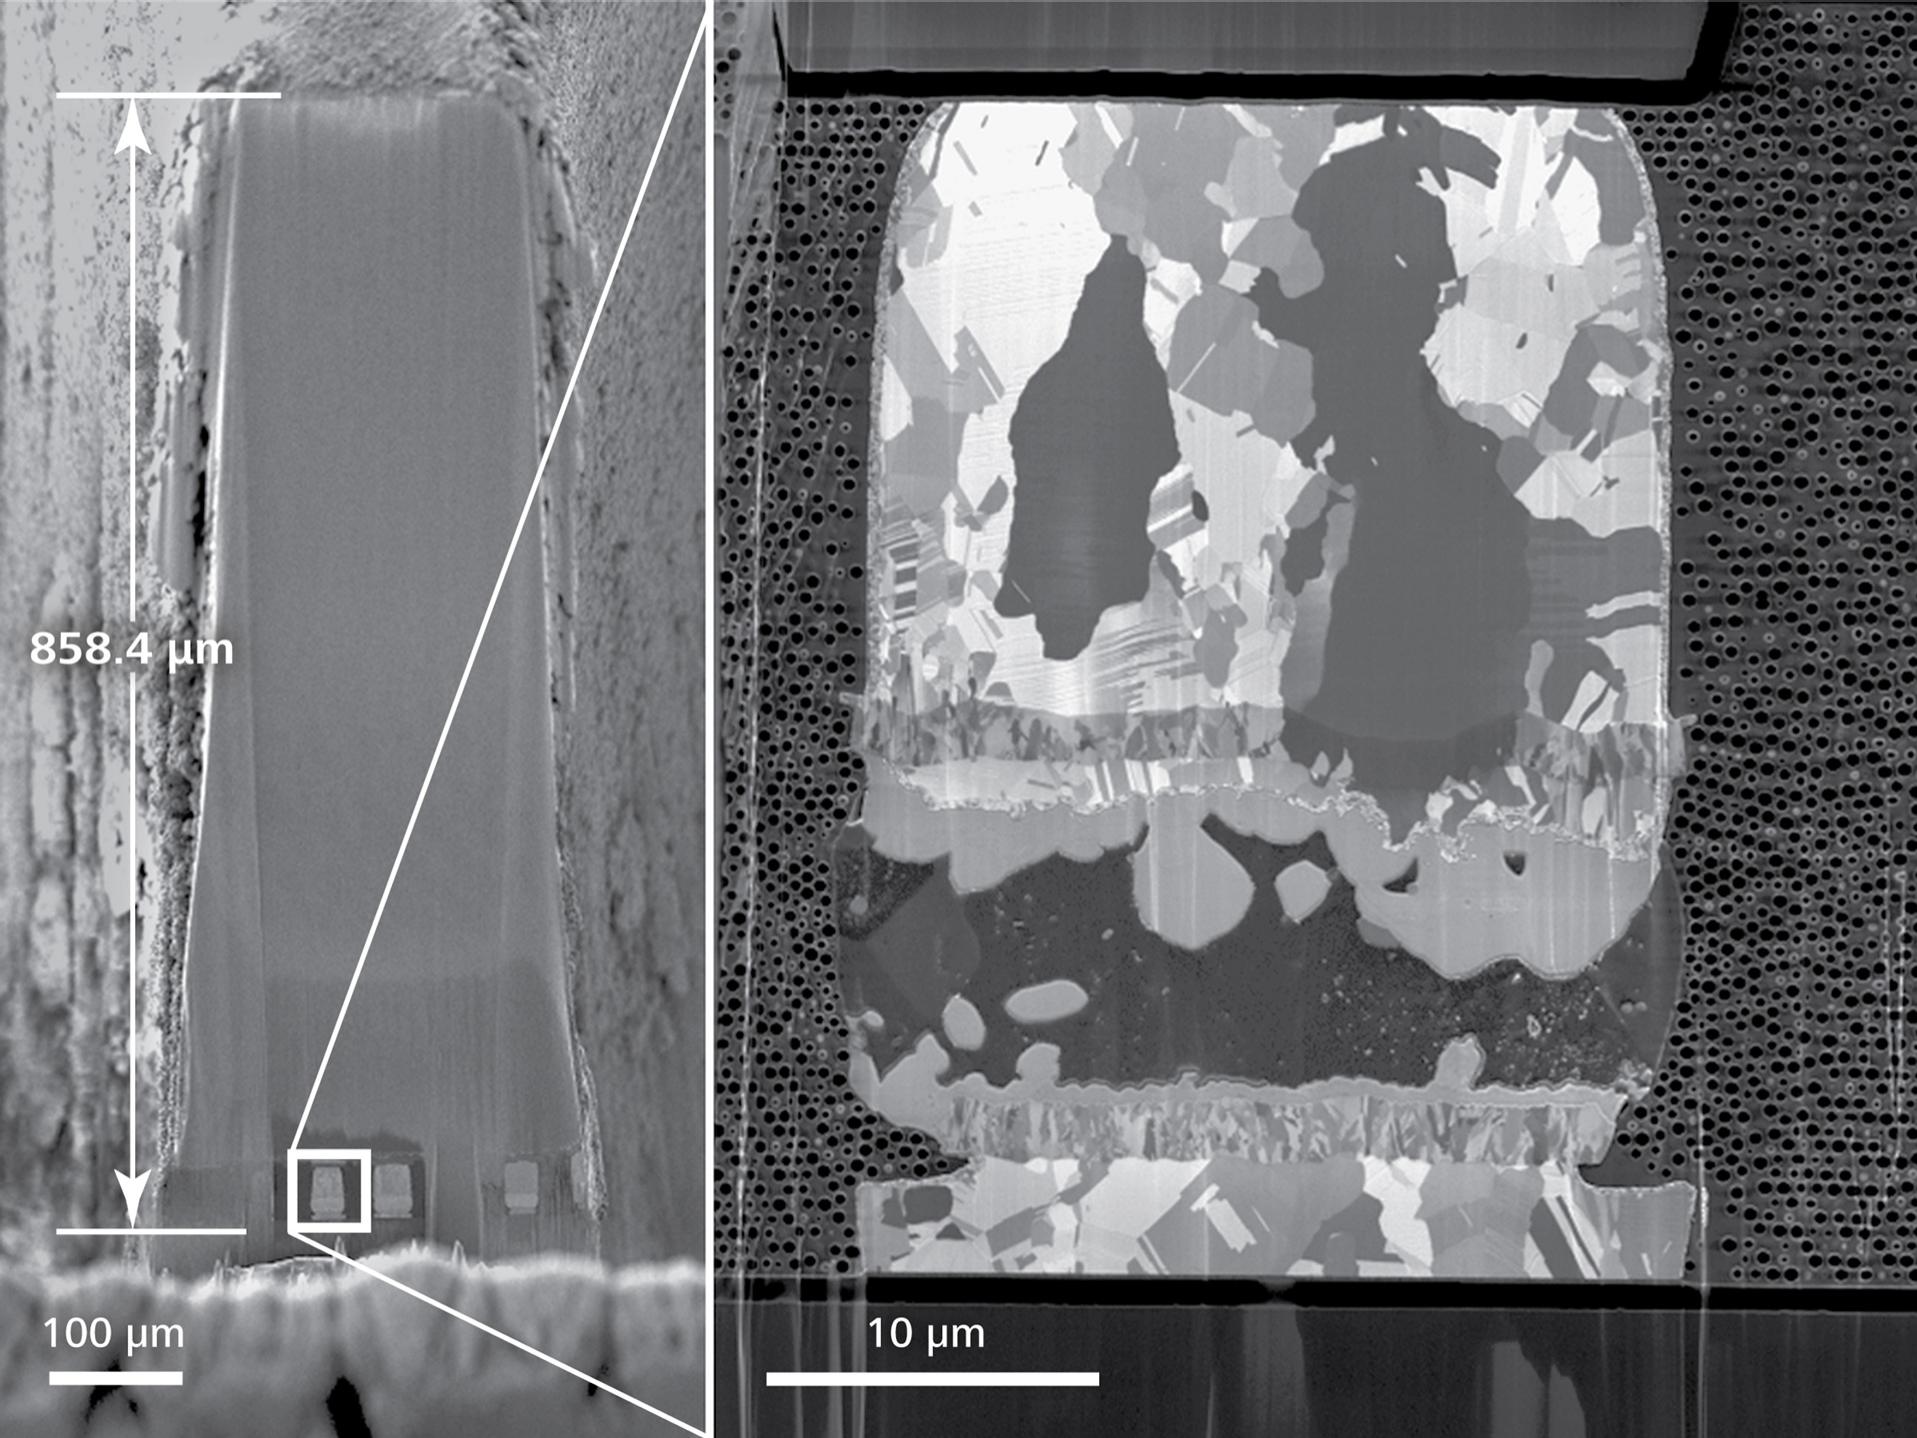 Left: 3D IC prepared using laser ablation and FIB polishing. Right: Backscattered electron image of microbump.